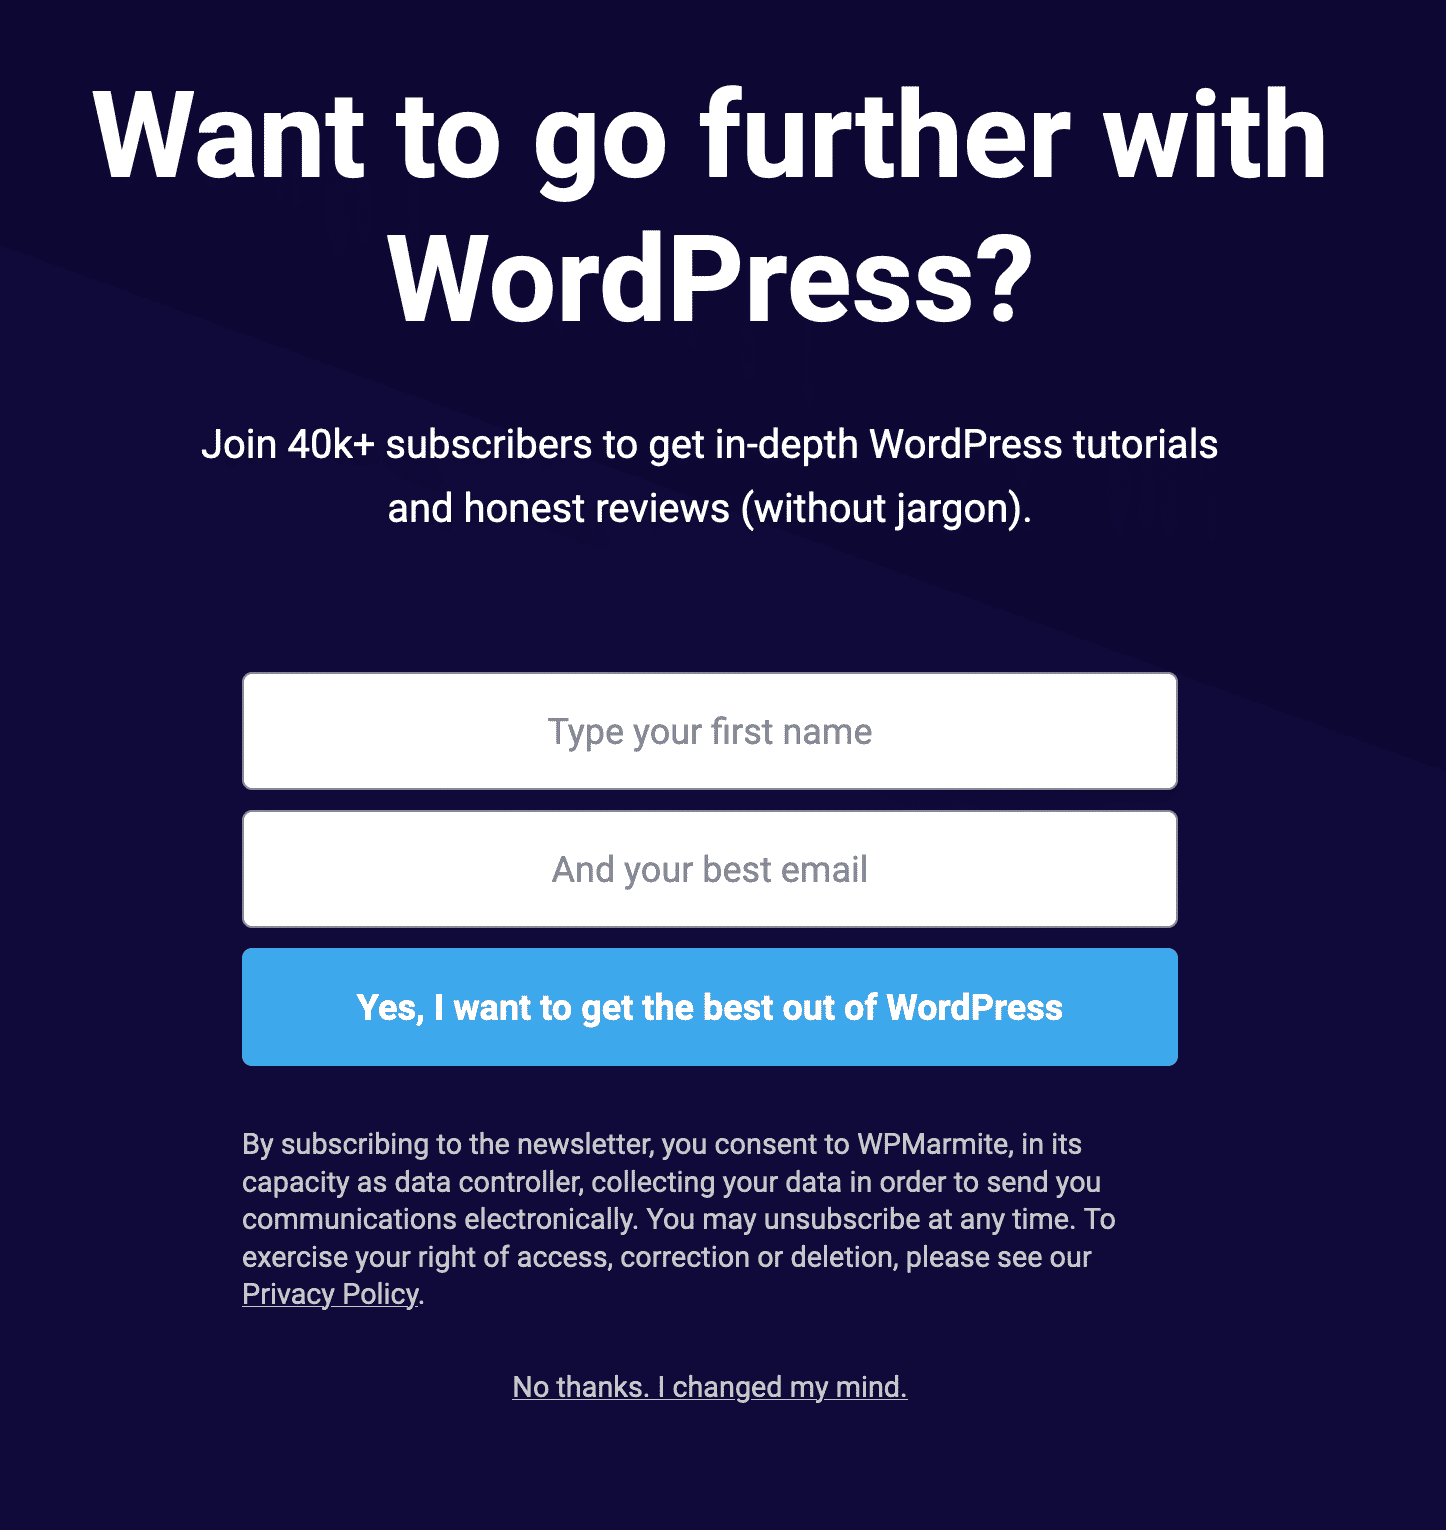 An opt-in form to subscribe to WPMarmite's newsletter.